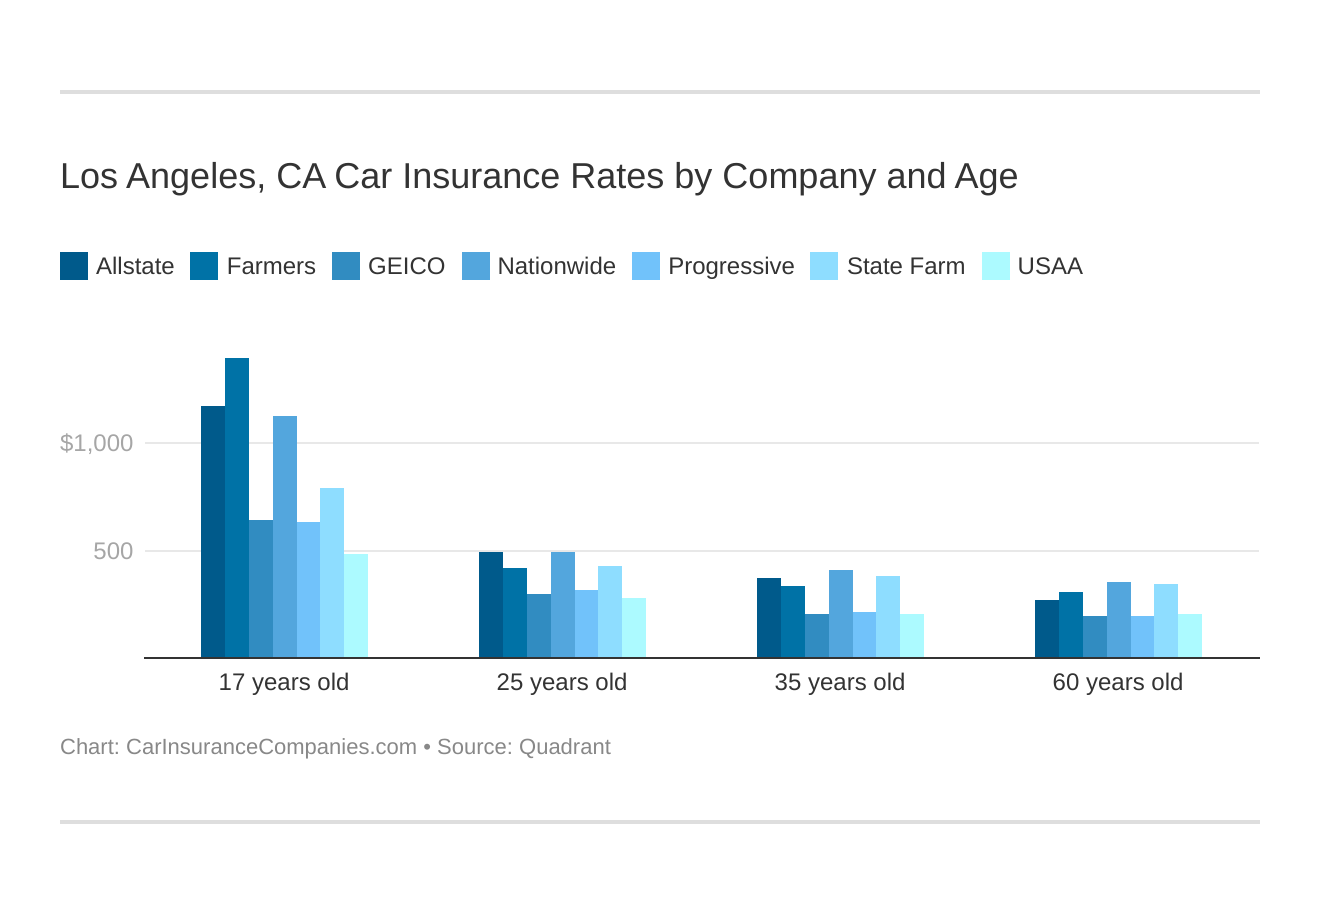 Los Angeles, CA Car Insurance Rates by Company and Age